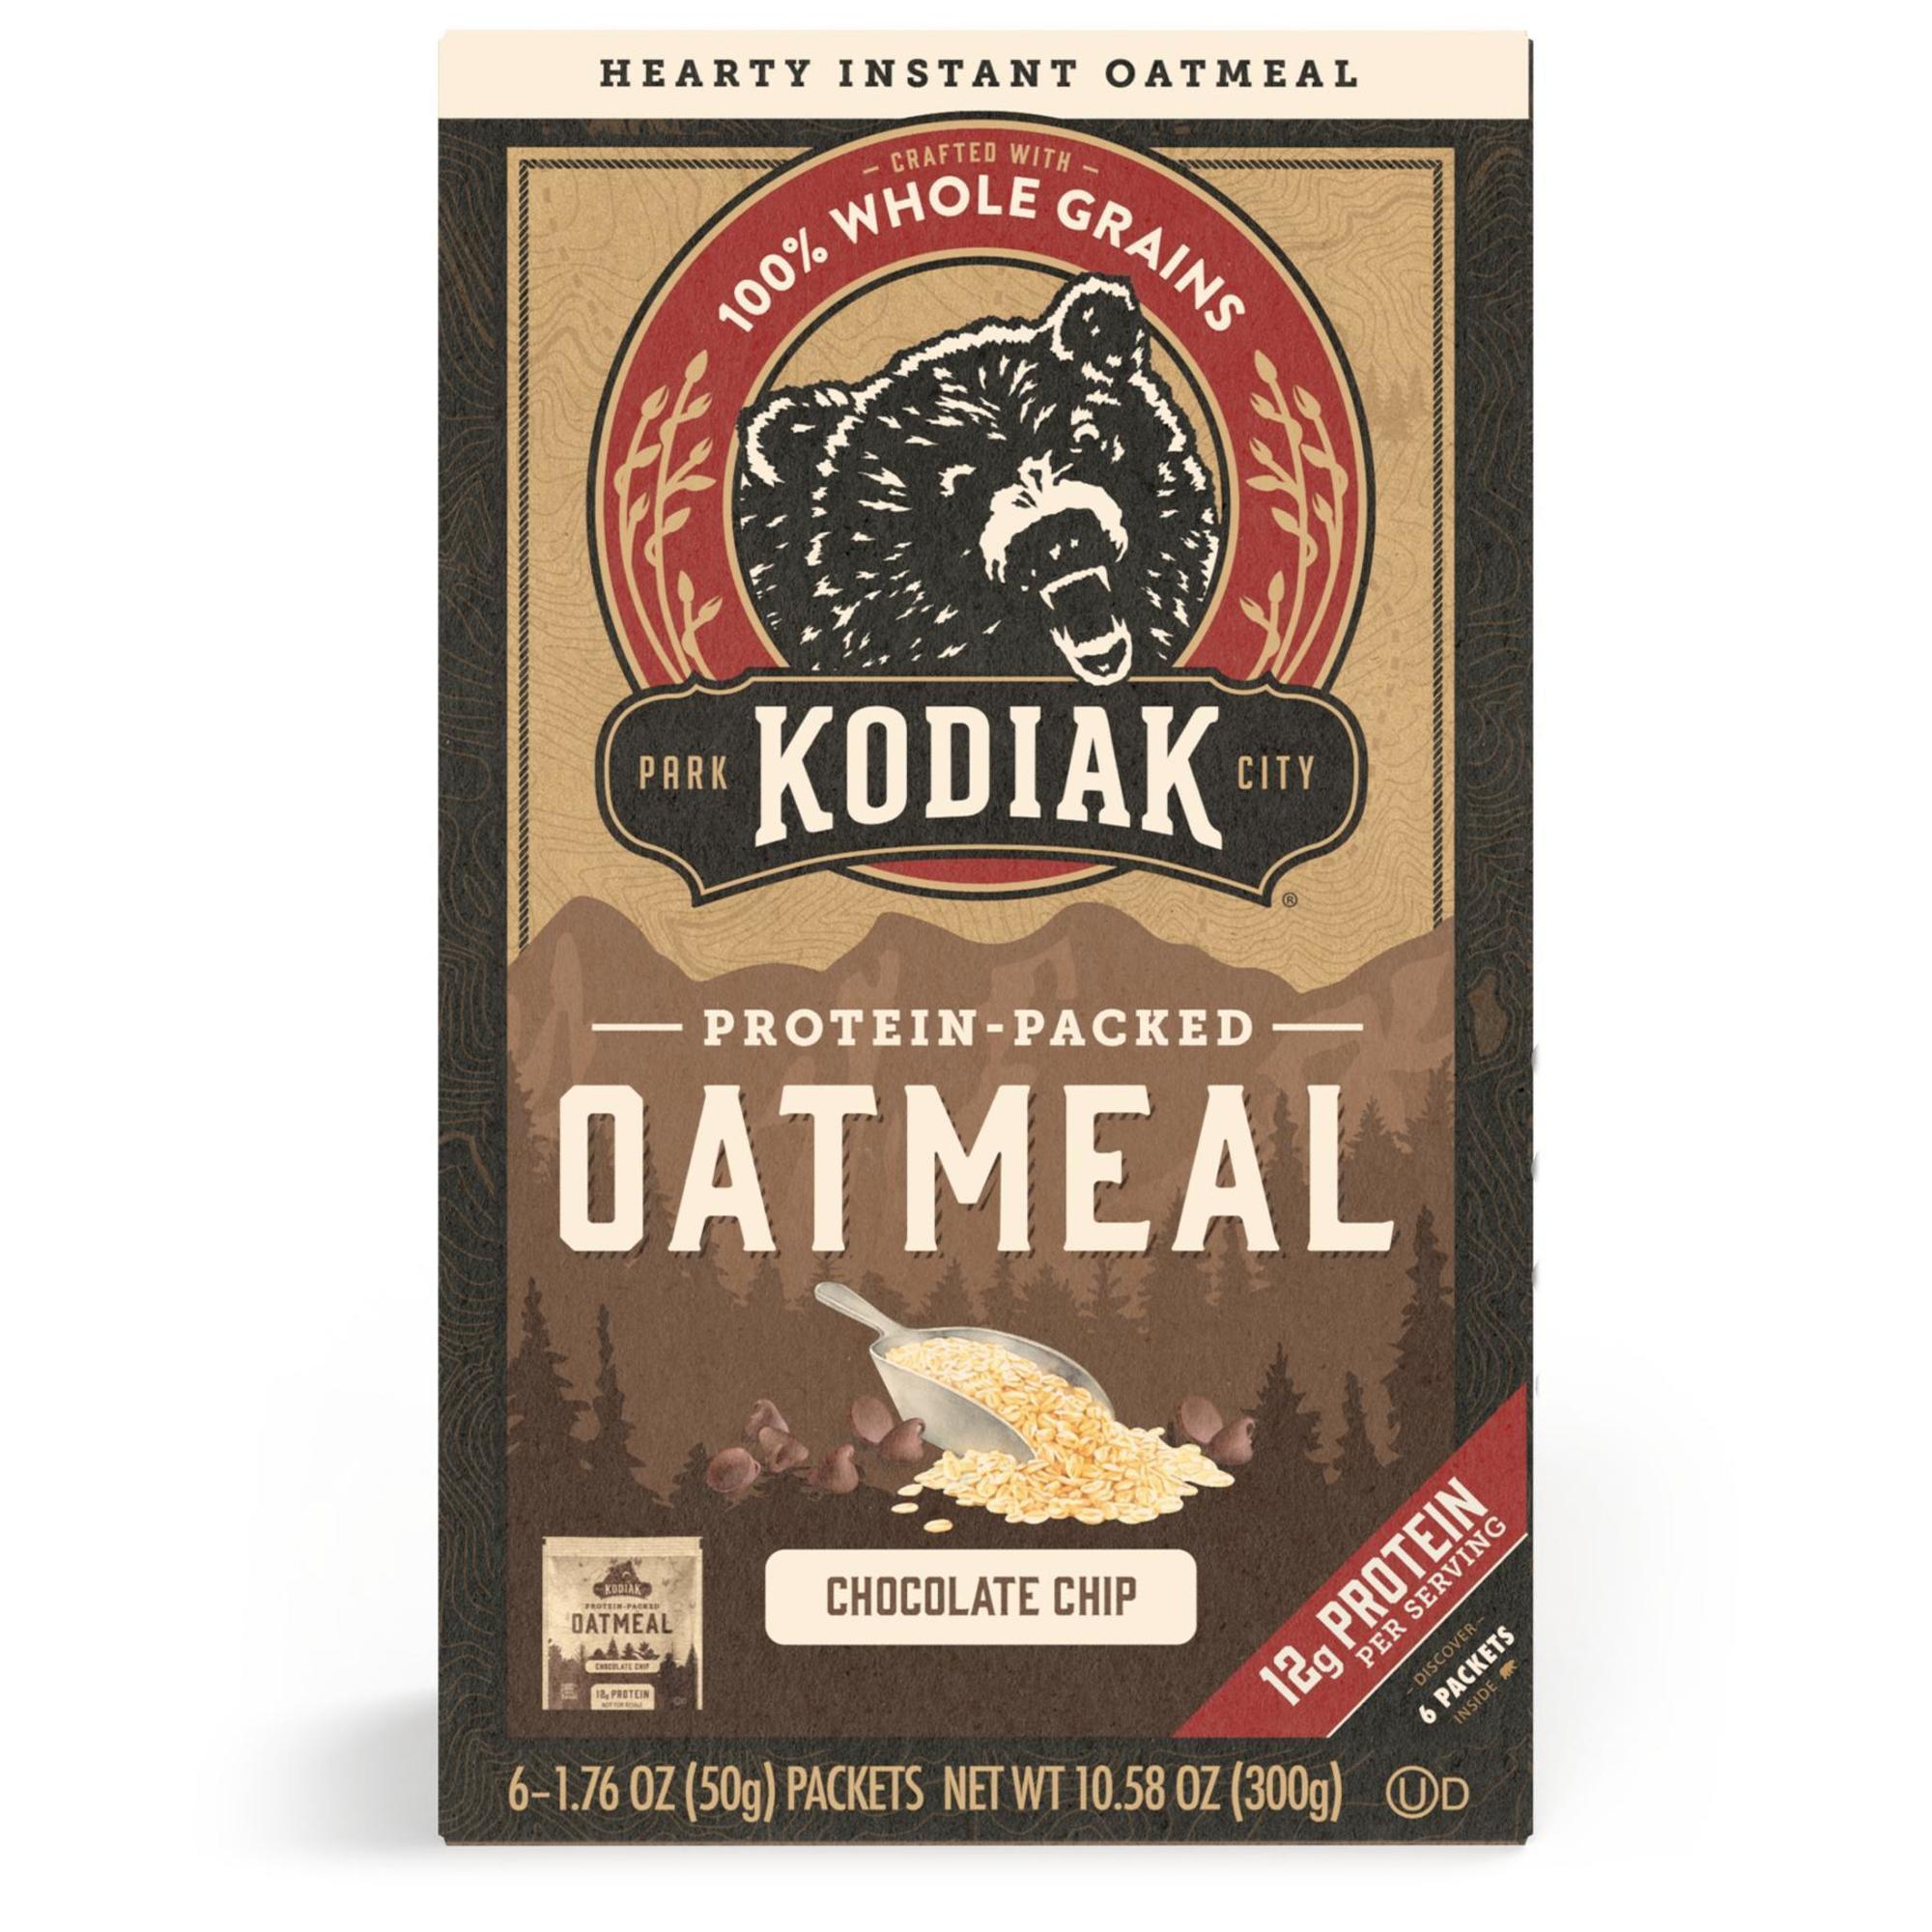 Kodiak Protein-Packed Chocolate Chip Instant Oatmeal, 1.76 oz, 6 Packets - image 1 of 9